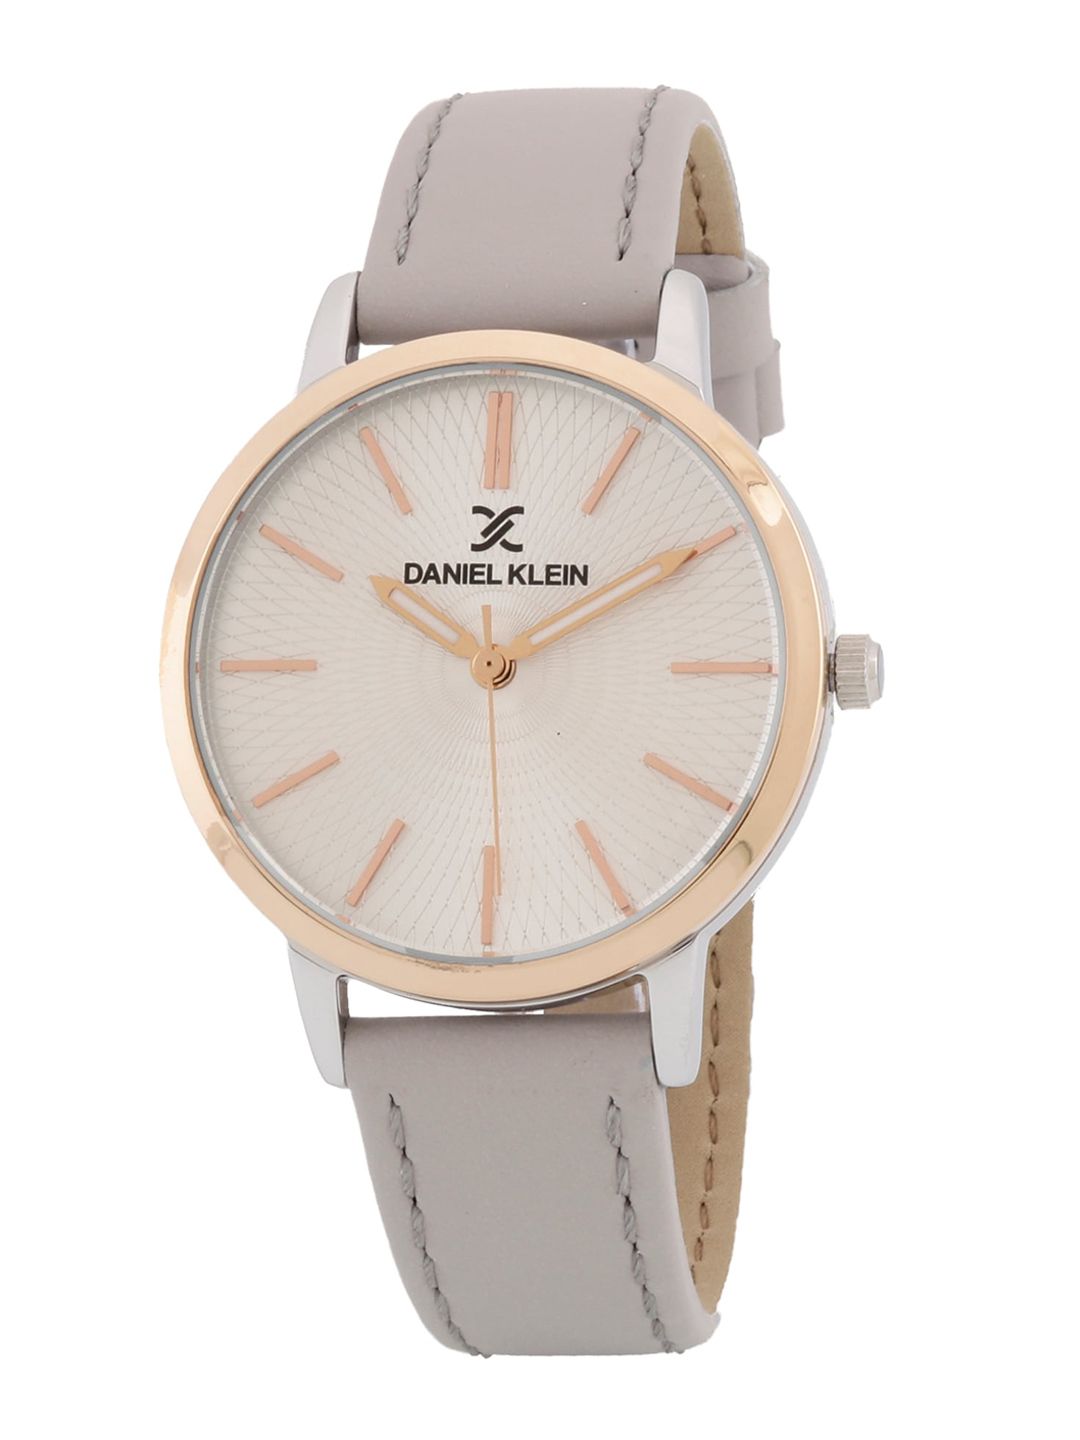 Daniel Klein Women Silver-Toned Dial & Grey Leather Straps Analogue Watch DK.1.12787-5 Price in India